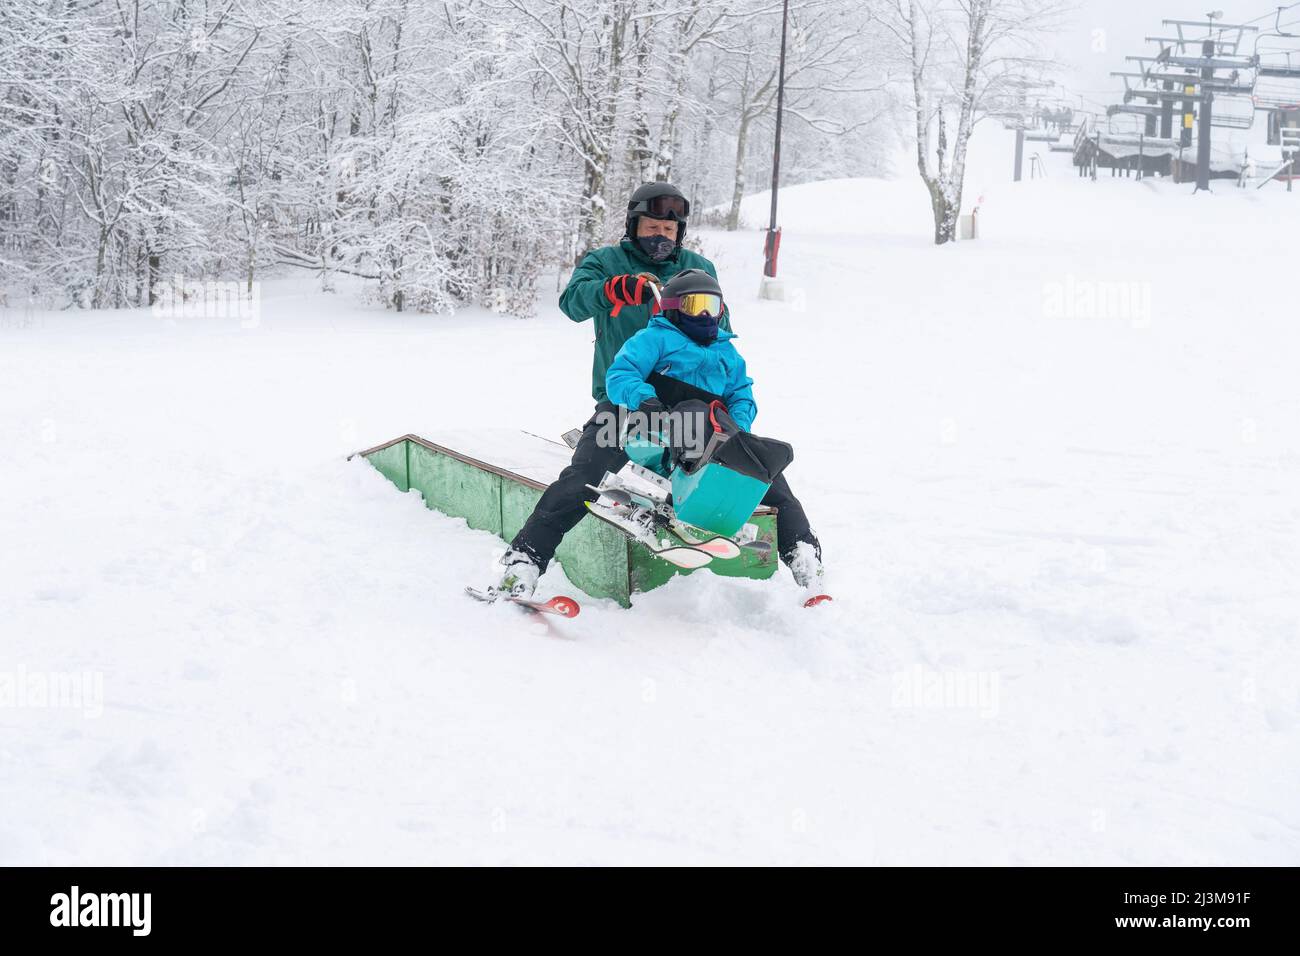 Adaptive skiing for a girl with Ullrich Congenital Muscular Dystrophy, at a ski resort with an instructor Stock Photo